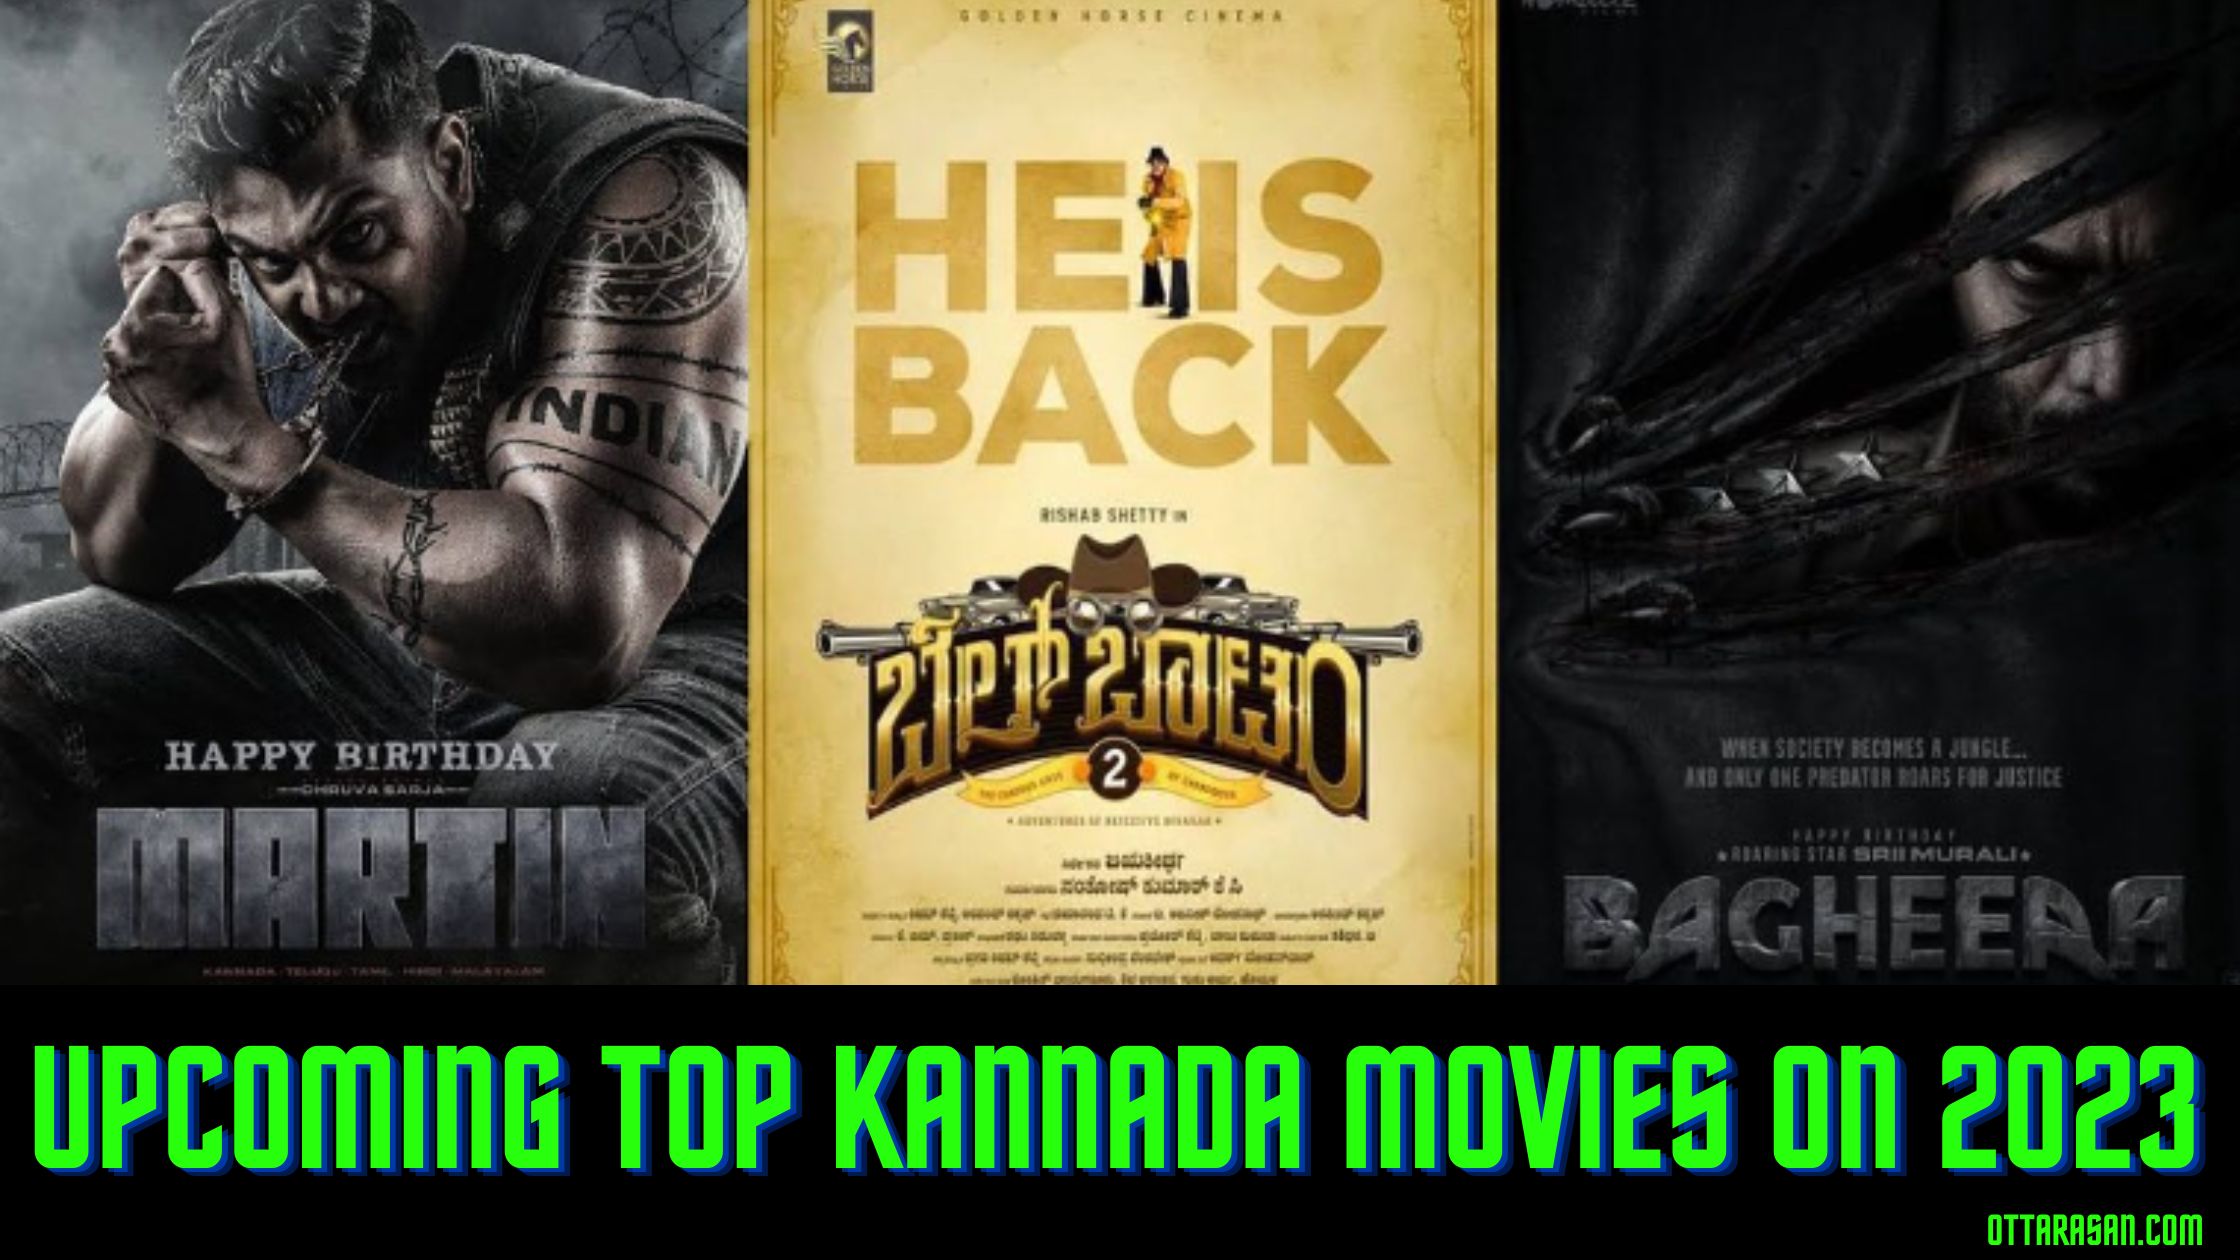 List of Upcoming Kannada Films | Famous Dhollywood Movies on 2023